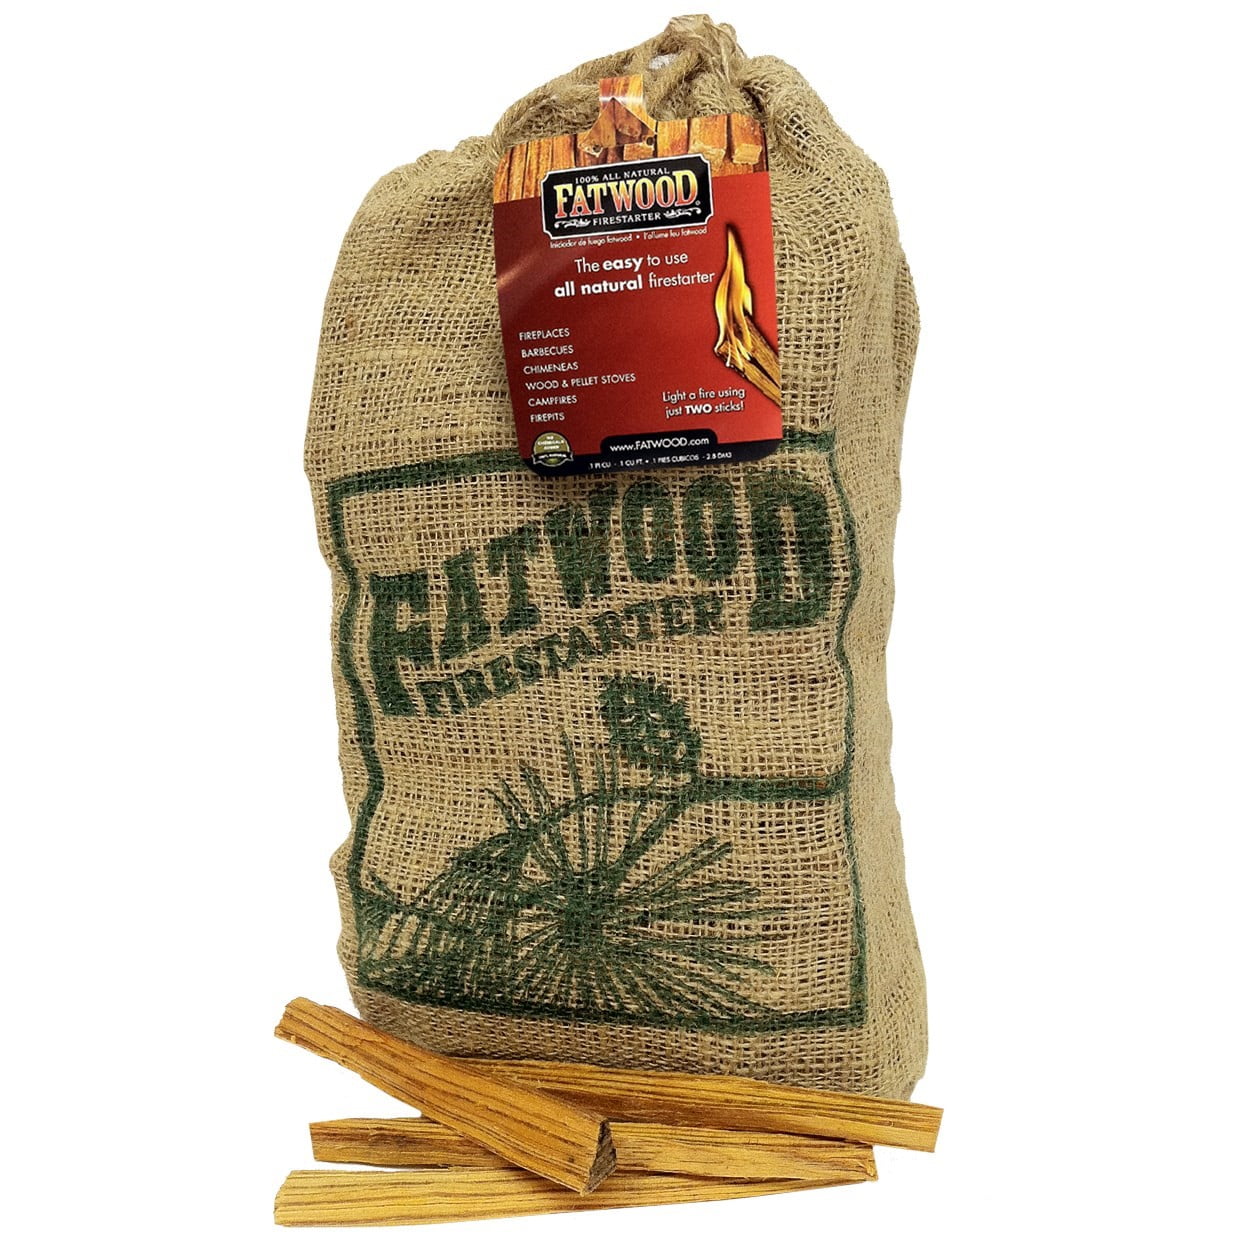 Fatwood GFB QUALITY FIRE STARTING MEXICAN FATWOOD "POCKET PACK IN HEAVY DUTY ZIPLOCK BAG 